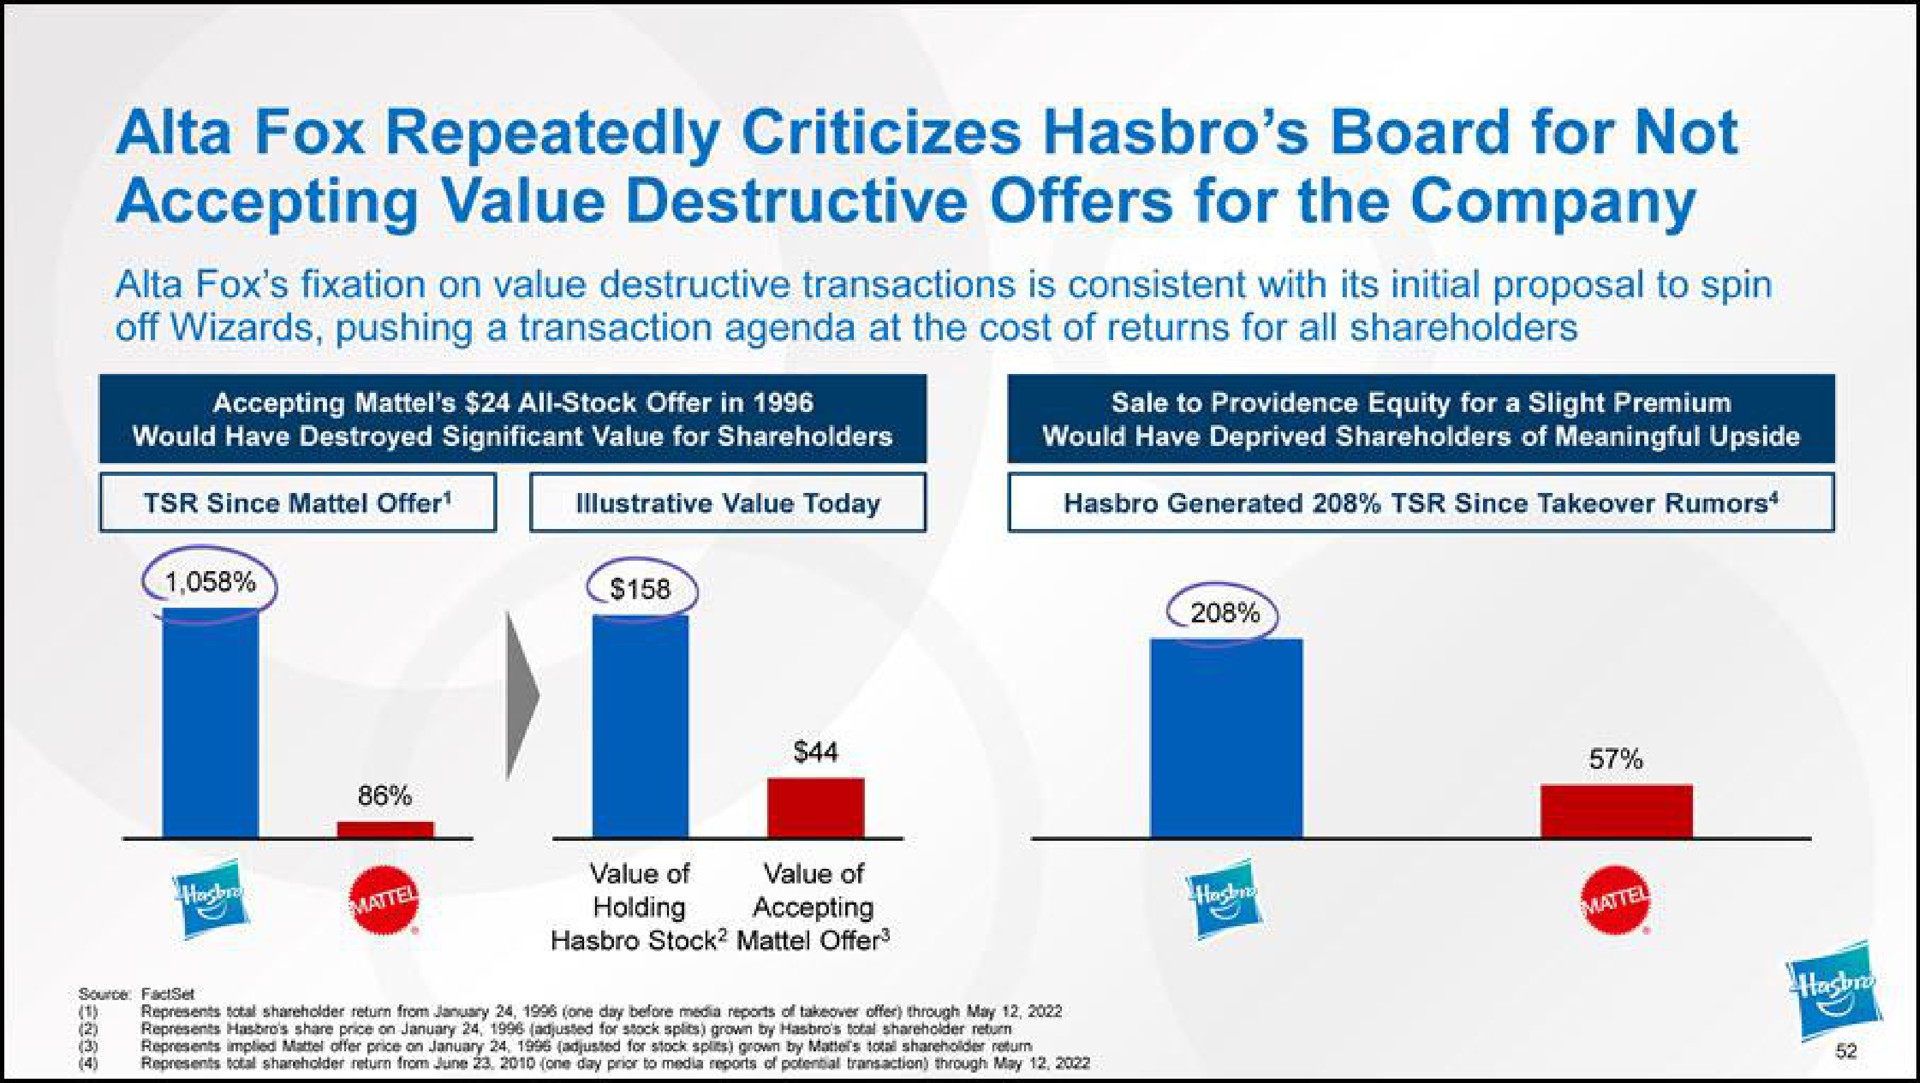 fox repeatedly criticizes board for not accepting value destructive offers for the company fox fixation on value destructive transactions is consistent with its initial proposal to spin off wizards pushing a transaction agenda at the cost of returns for all shareholders accepting a | Hasbro